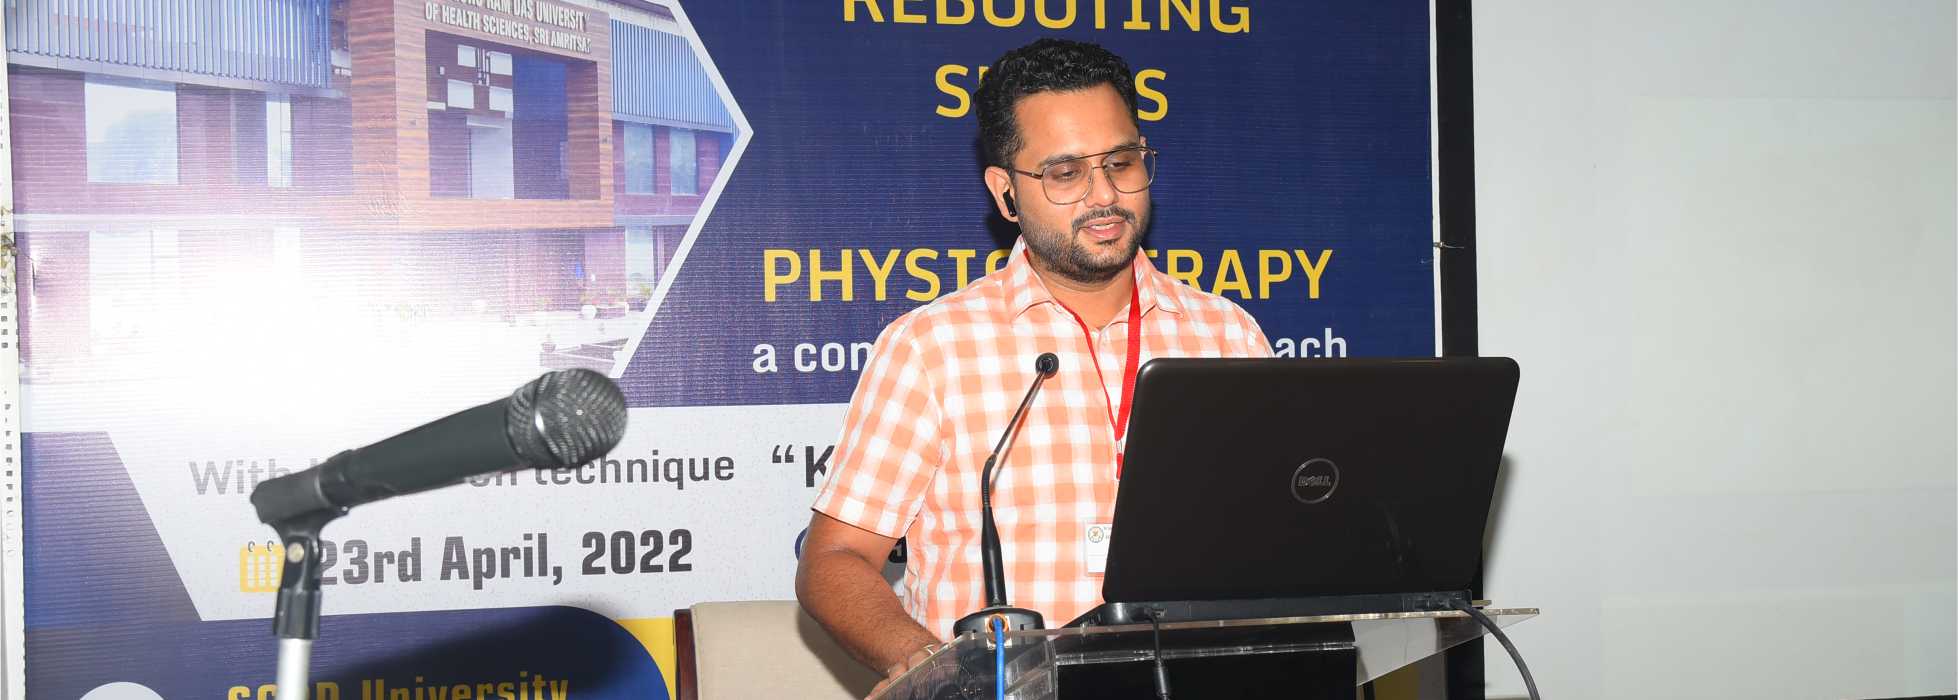 galimgs/CME Physiotherapy April 2022/P - 13.jpg